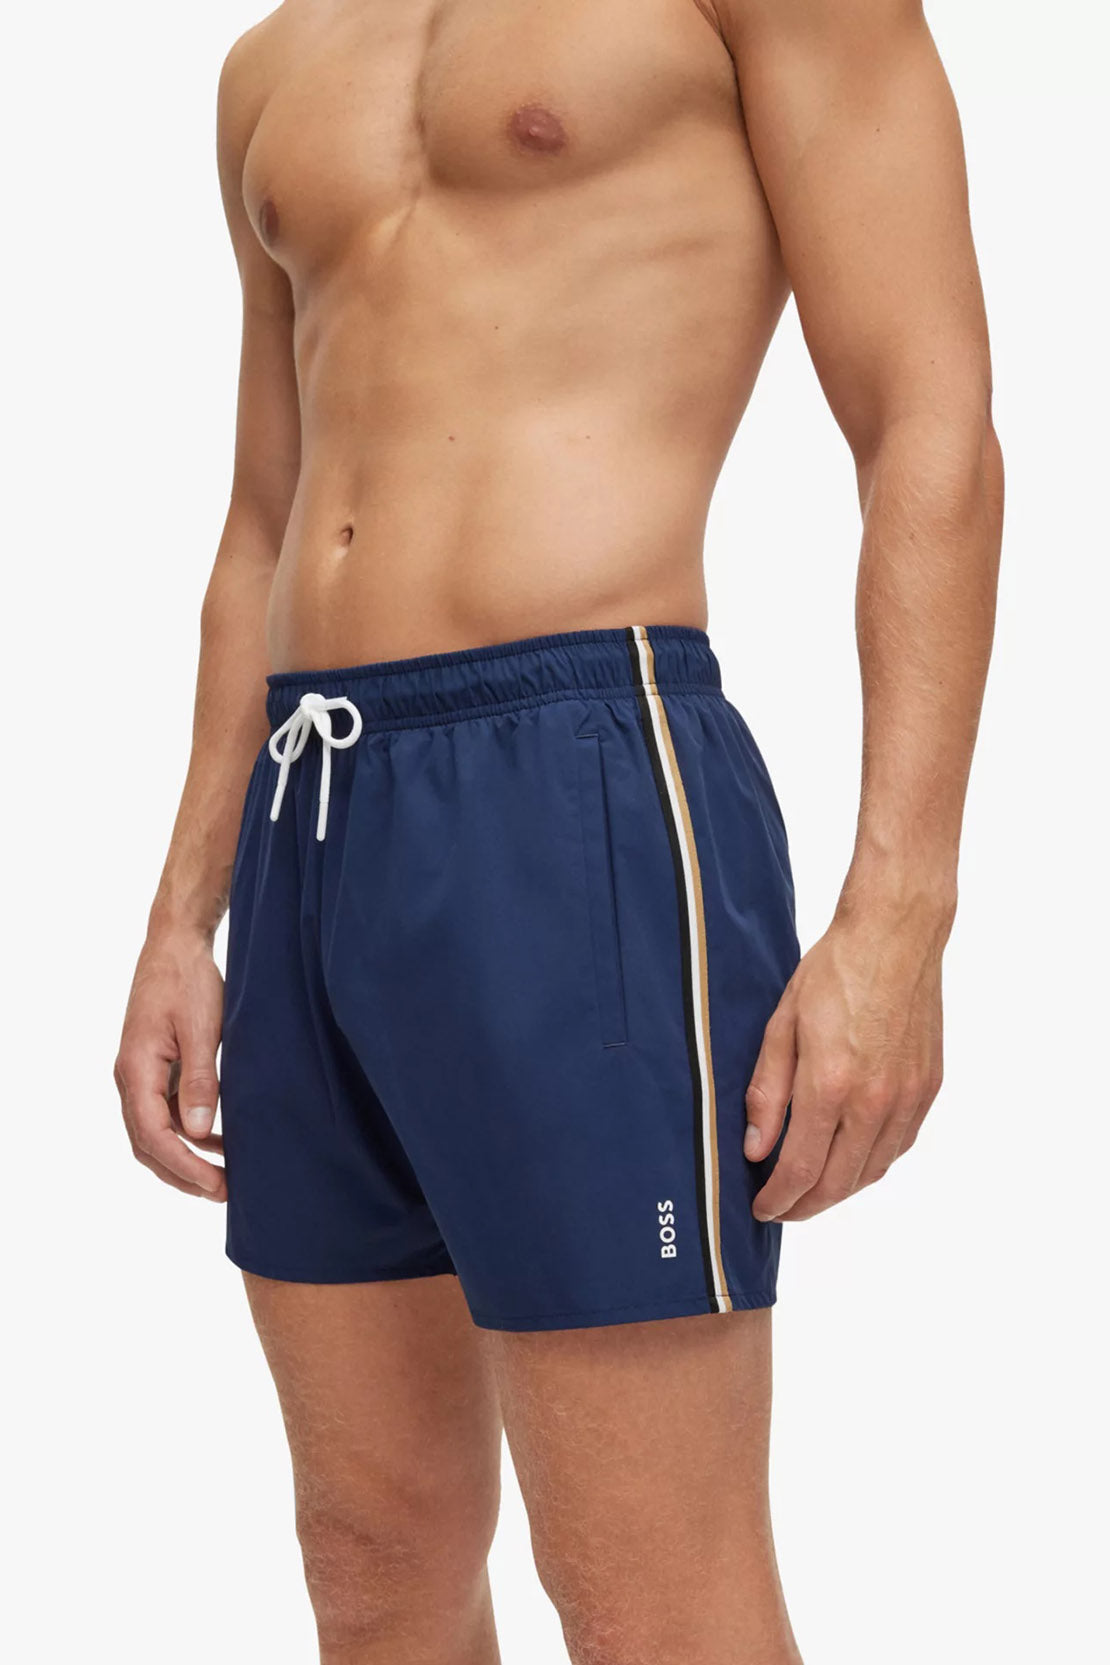 BOSS - ICONIC Swim Shorts With Stripe Detail In Navy Blue 50491594 413